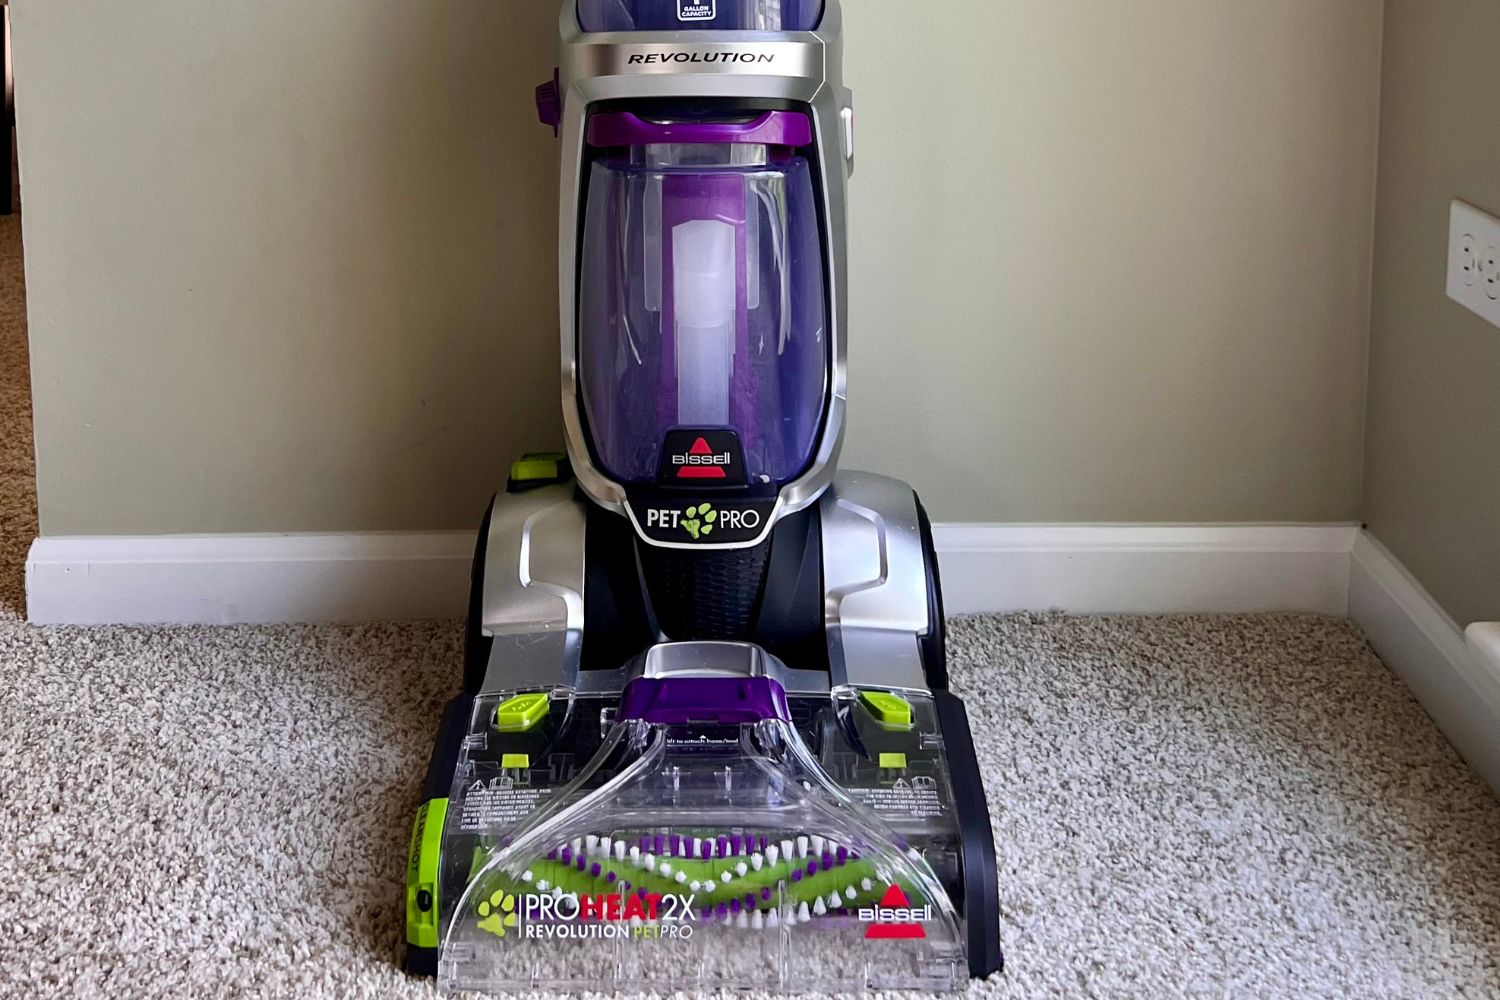 The Best Carpet Cleaner for Pets Option